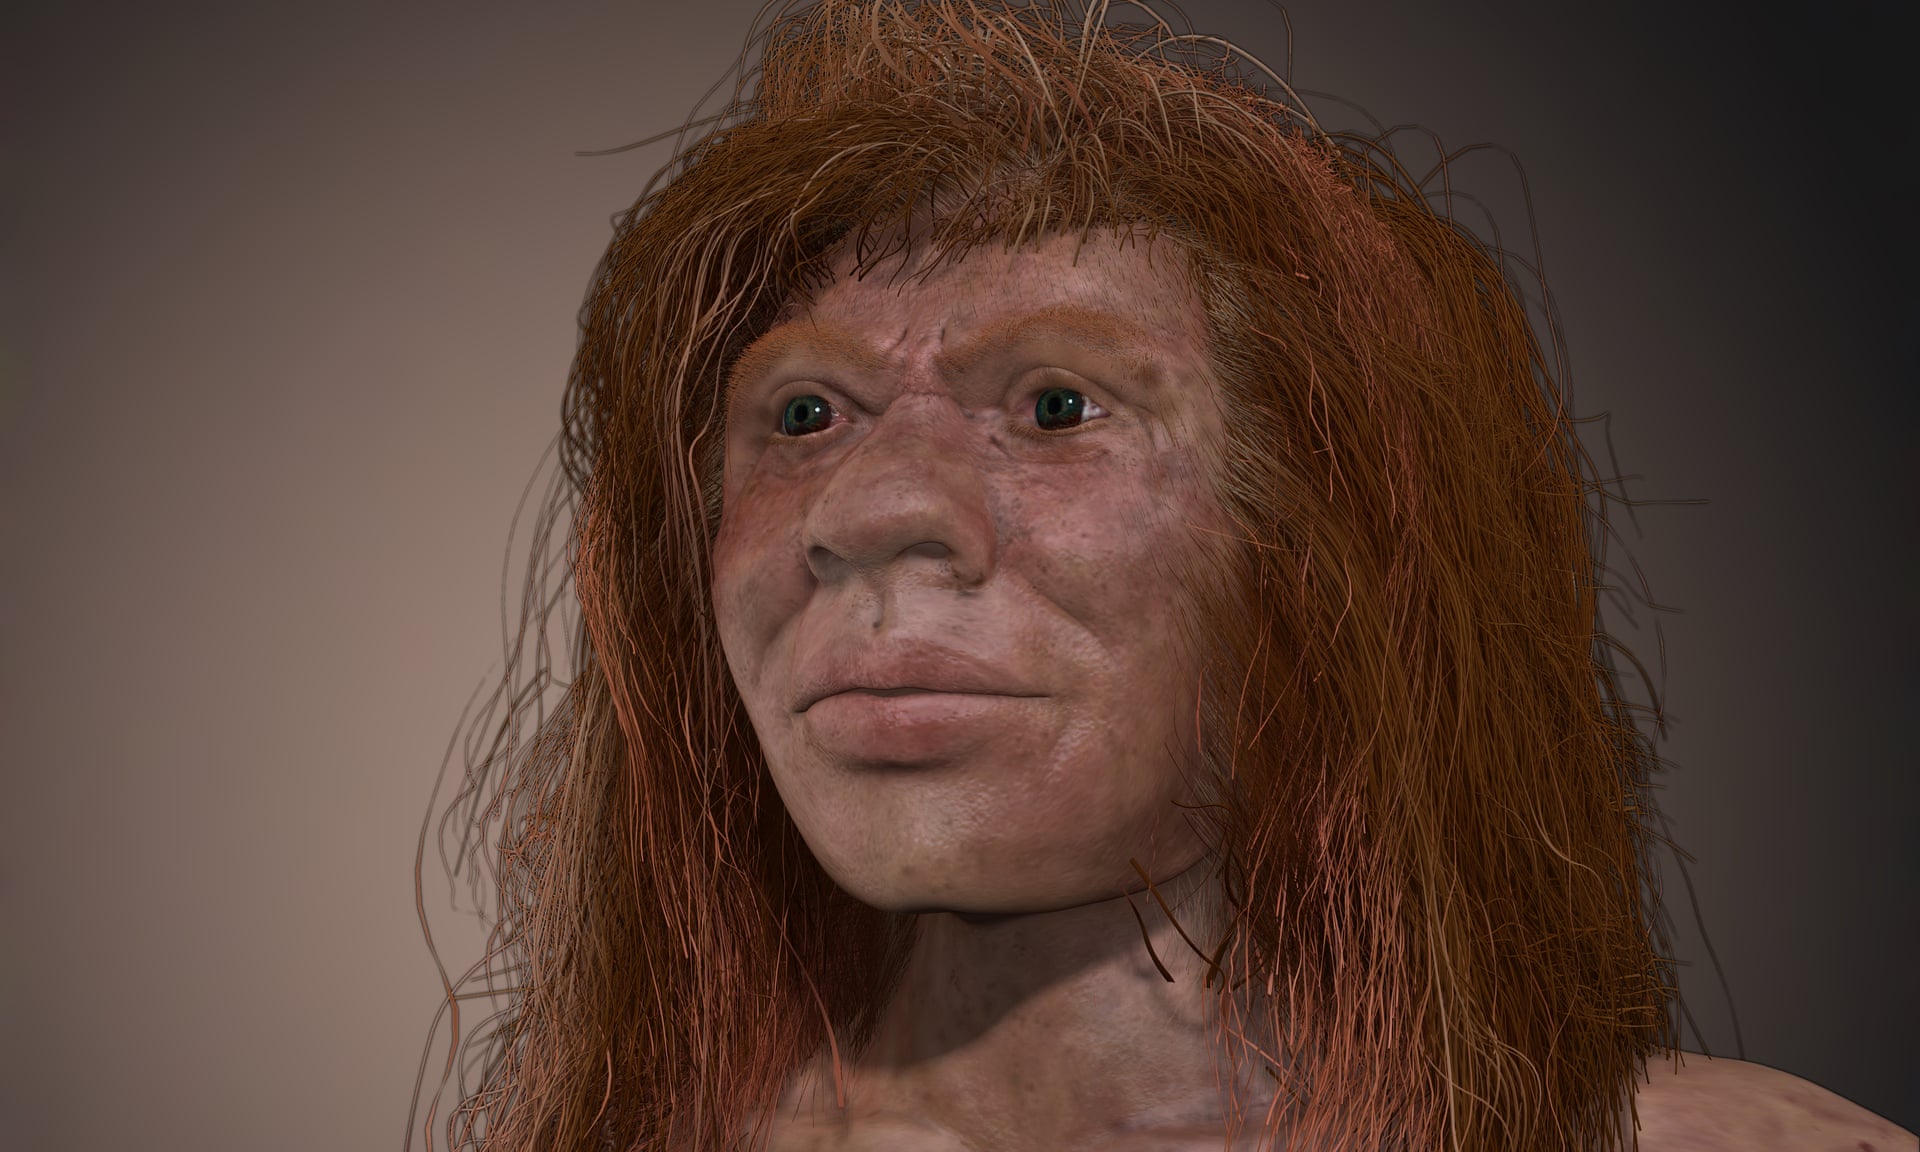 Denny, a mysterious child from 90,000 years ago, whose parents were two different human species 2